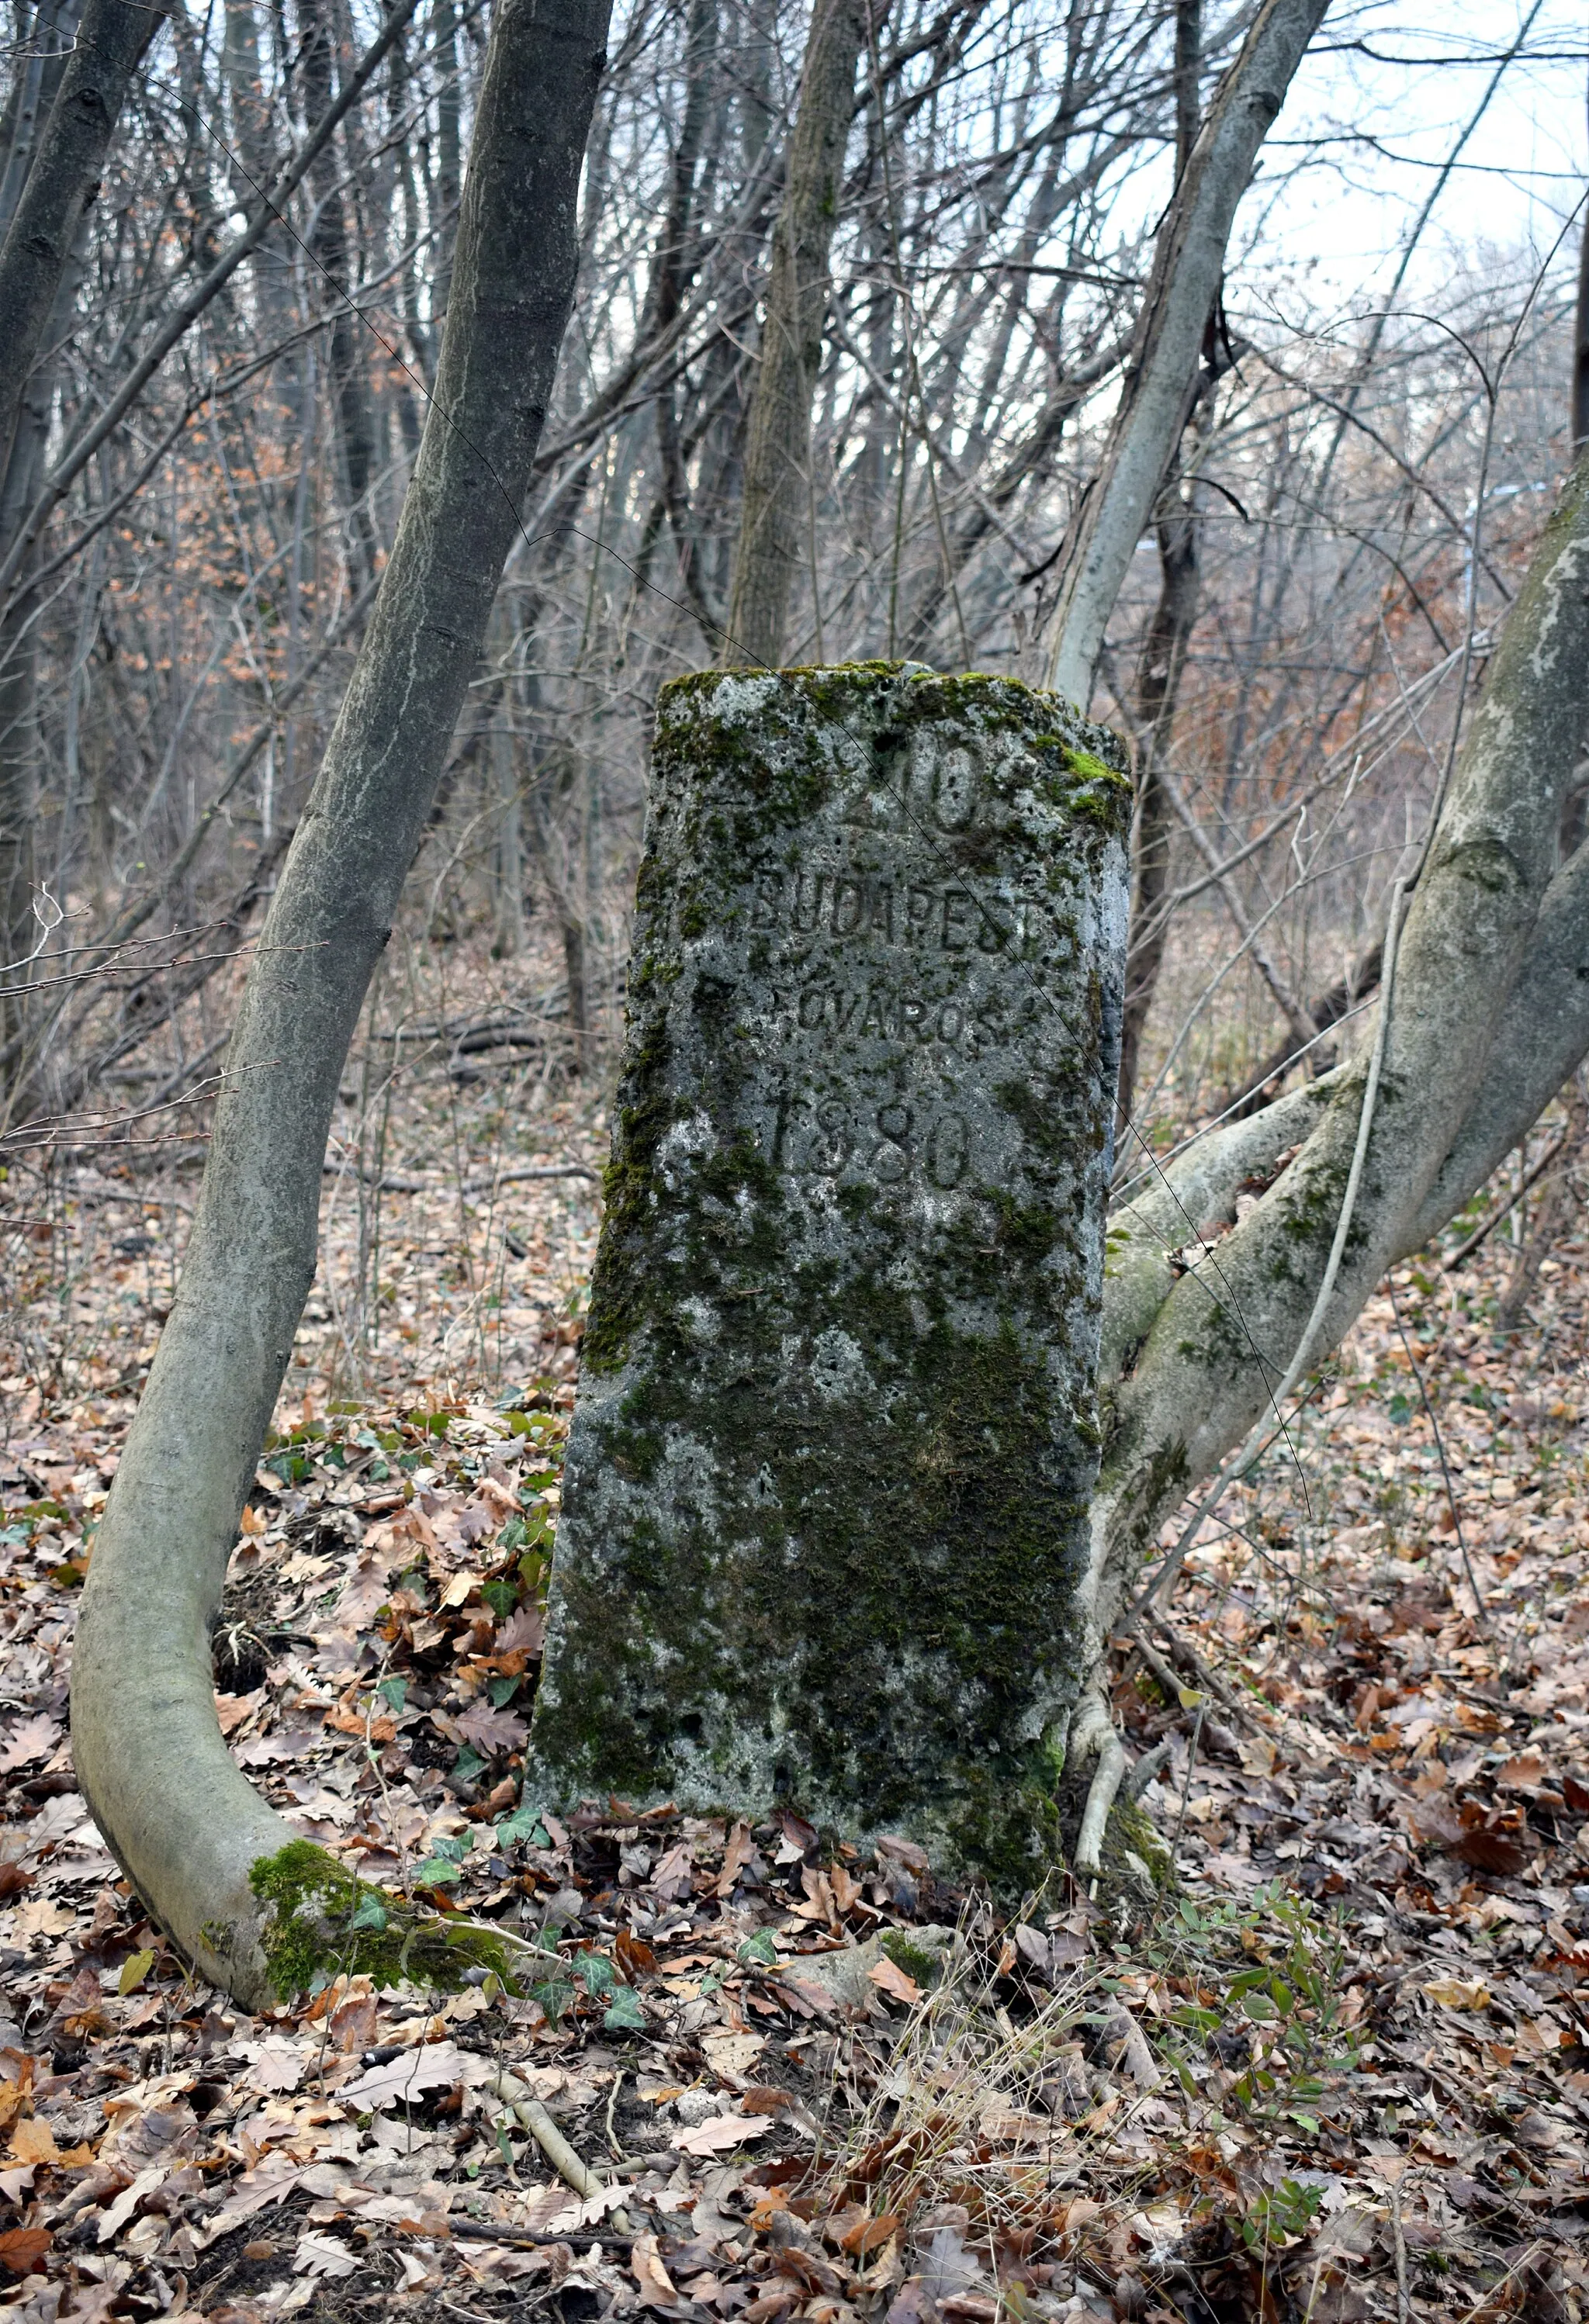 Photo showing: No. 210 boundary stone of Budapest (1880), originally stood on the boundary with Budakeszi. It is located on the high bank by Budakeszi út, on the northwestern slope of János-hegy. The inscription on the other side (Budakesz) was erased after Budakeszierdő was bought by Budapest. On the right side of the stone the year 1933 is marked while the letters "HR" are on the left.